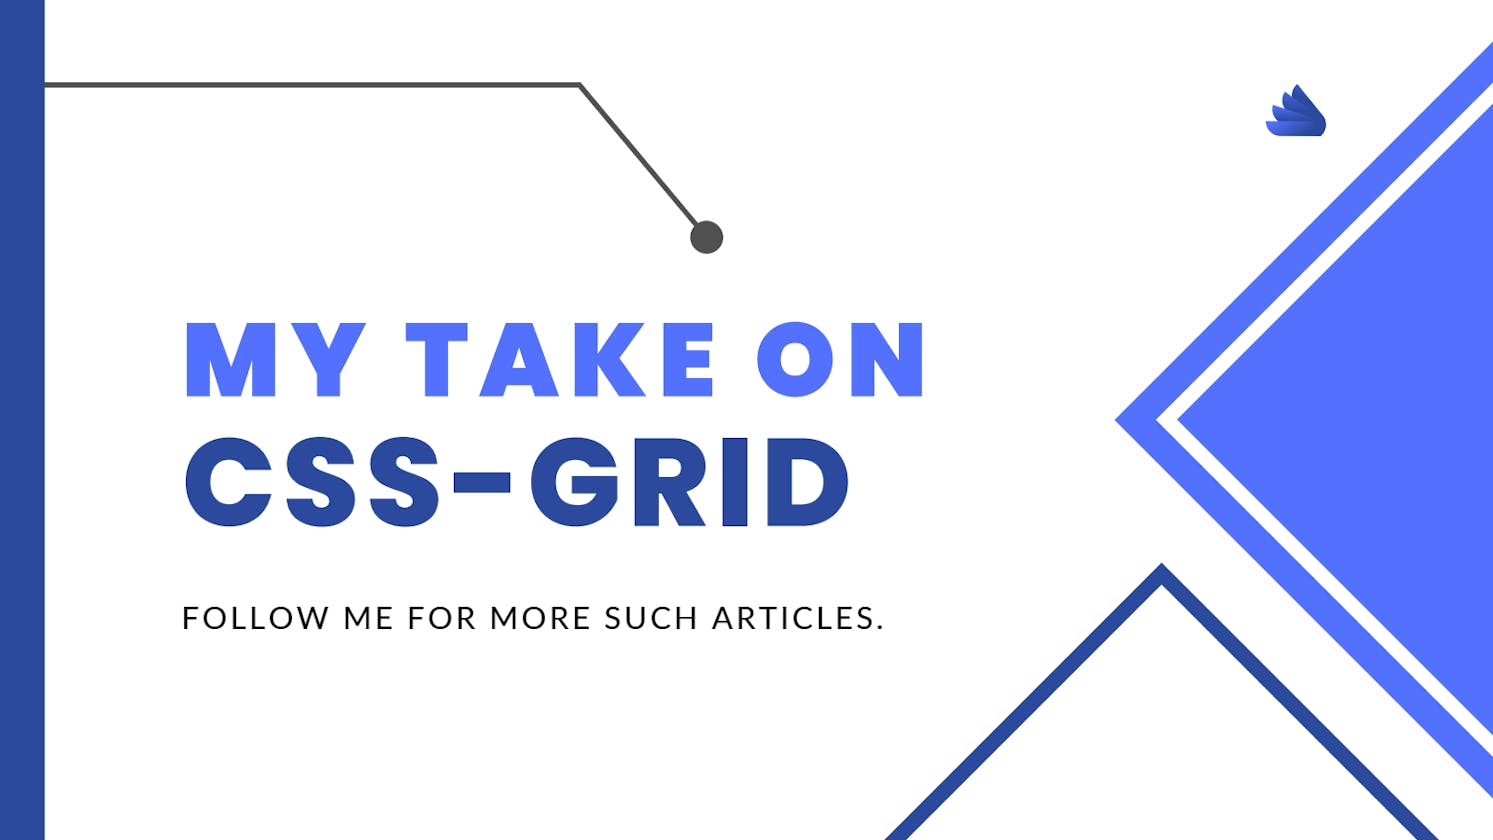 My take on CSS-GRID